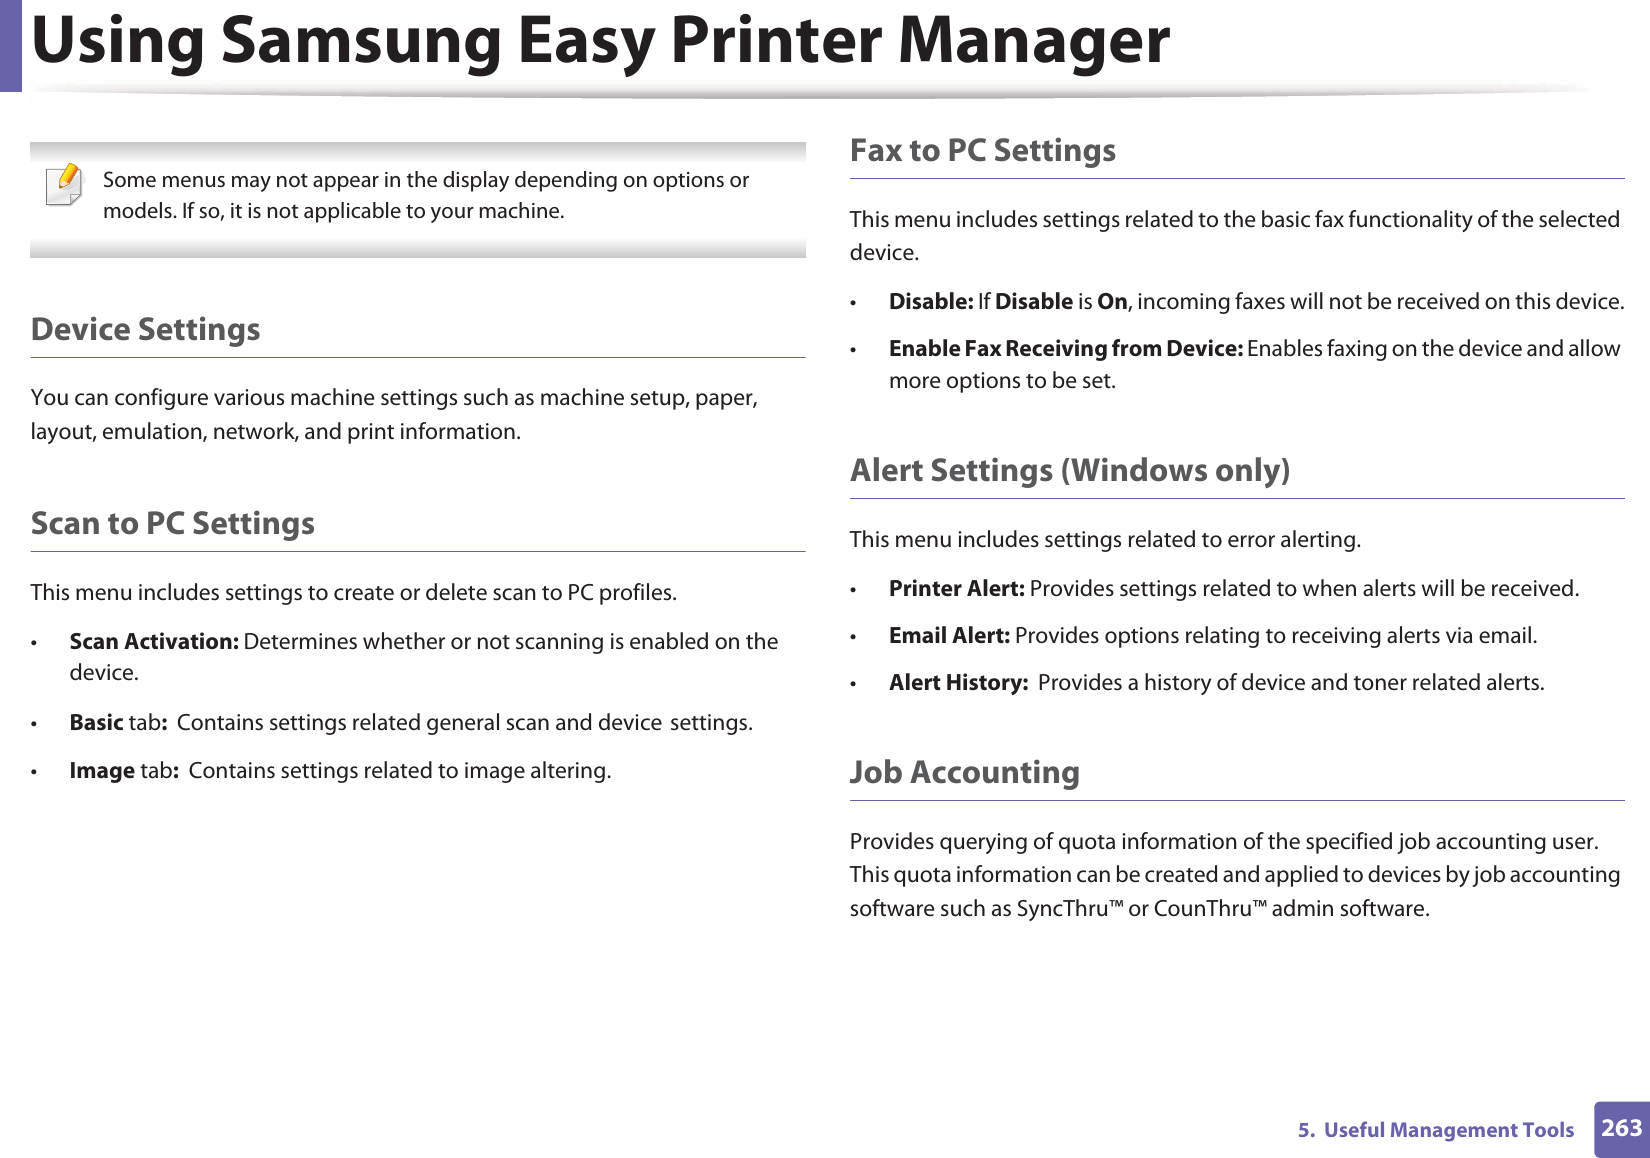 Using Samsung Easy Printer Manager2635.  Useful Management Tools Some menus may not appear in the display depending on options or models. If so, it is not applicable to your machine. Device SettingsYou can configure various machine settings such as machine setup, paper, layout, emulation, network, and print information.Scan to PC SettingsThis menu includes settings to create or delete scan to PC profiles. •Scan Activation: Determines whether or not scanning is enabled on the device.•Basic tab:  Contains settings related general scan and deviceGsettings.•Image tab:  Contains settings related to image altering.Fax to PC SettingsThis menu includes settings related to the basic fax functionality of the selected device. •Disable: If Disable is On, incoming faxes will not be received on this device.•Enable Fax Receiving from Device: Enables faxing on the device and allow more options to be set.Alert Settings (Windows only)This menu includes settings related to error alerting. •Printer Alert: Provides settings related to when alerts will be received.•Email Alert: Provides options relating to receiving alerts via email.•Alert History:  Provides a history of device and toner related alerts.Job AccountingProvides querying of quota information of the specified job accounting user. This quota information can be created and applied to devices by job accounting software such as SyncThru™ or CounThru™ admin software.